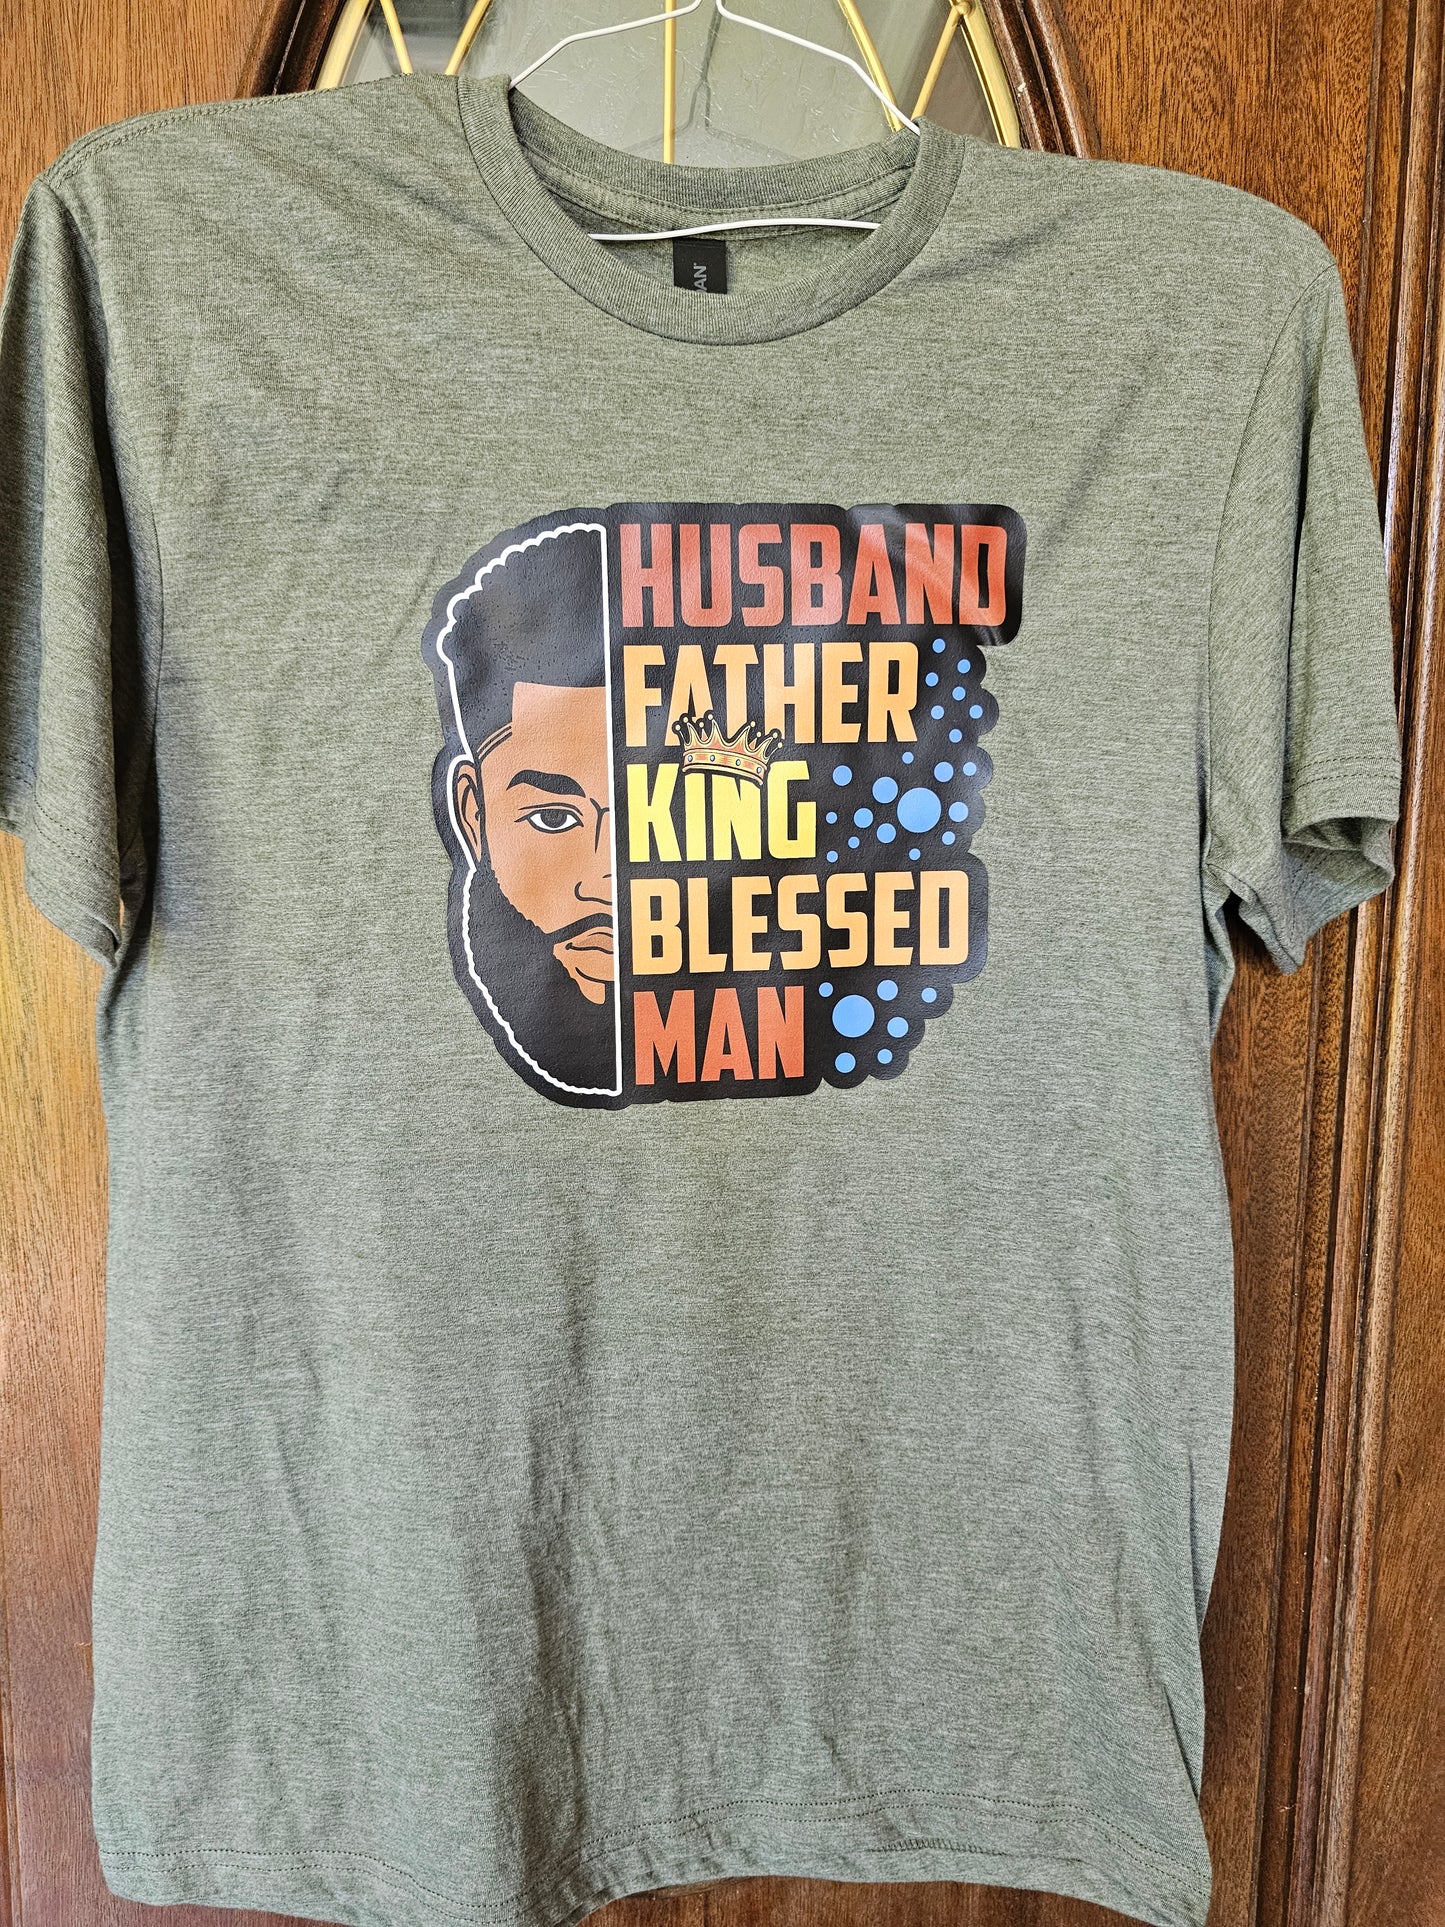 Husband Father King Blessed Man Handmade Graphic T- Shirt